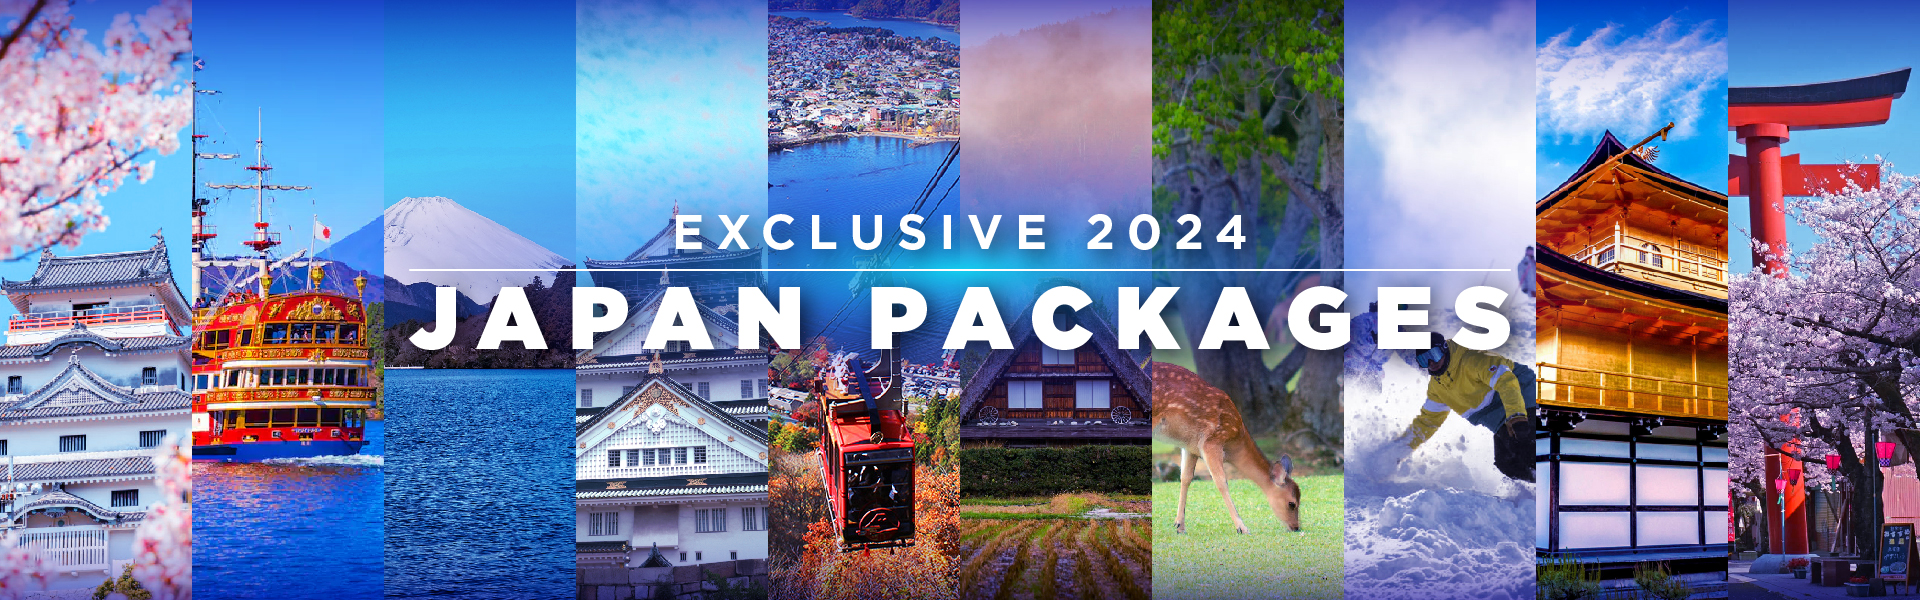 Exclusive 2024 Japan Packages Banner 01